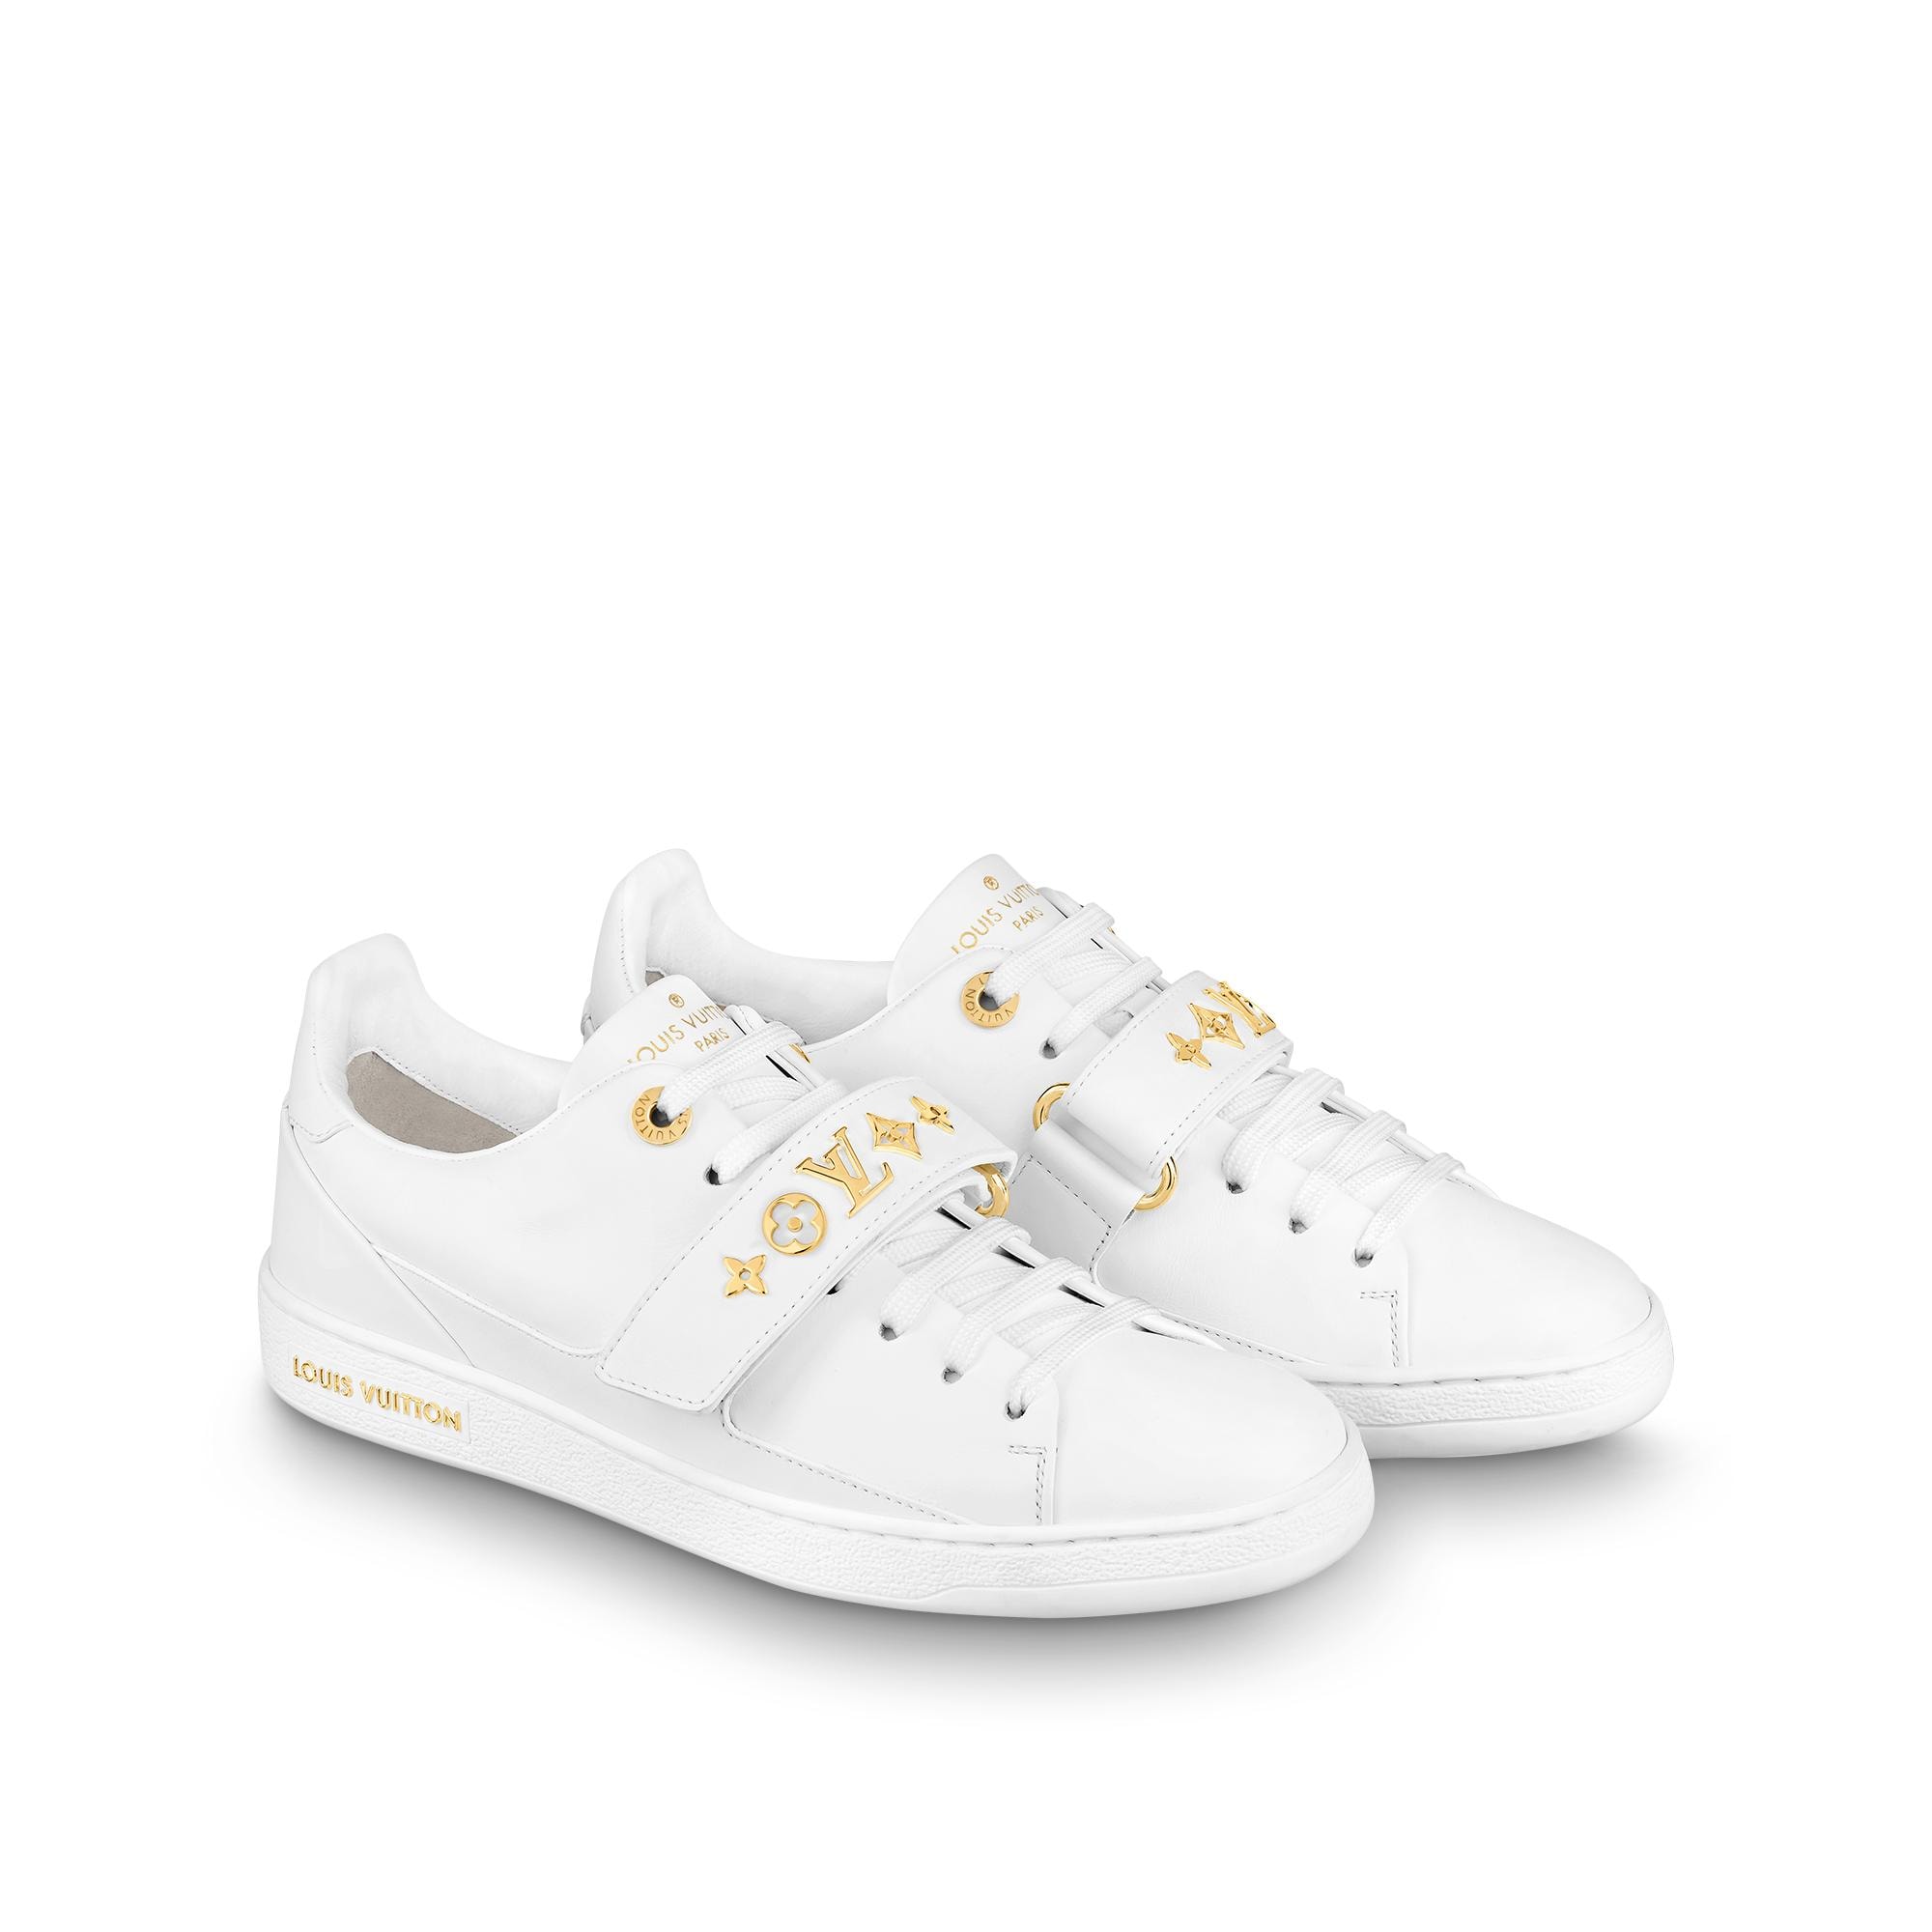 Louis Vuitton White & Gold Leather Front Row Low Top Sneakers Shoes 36